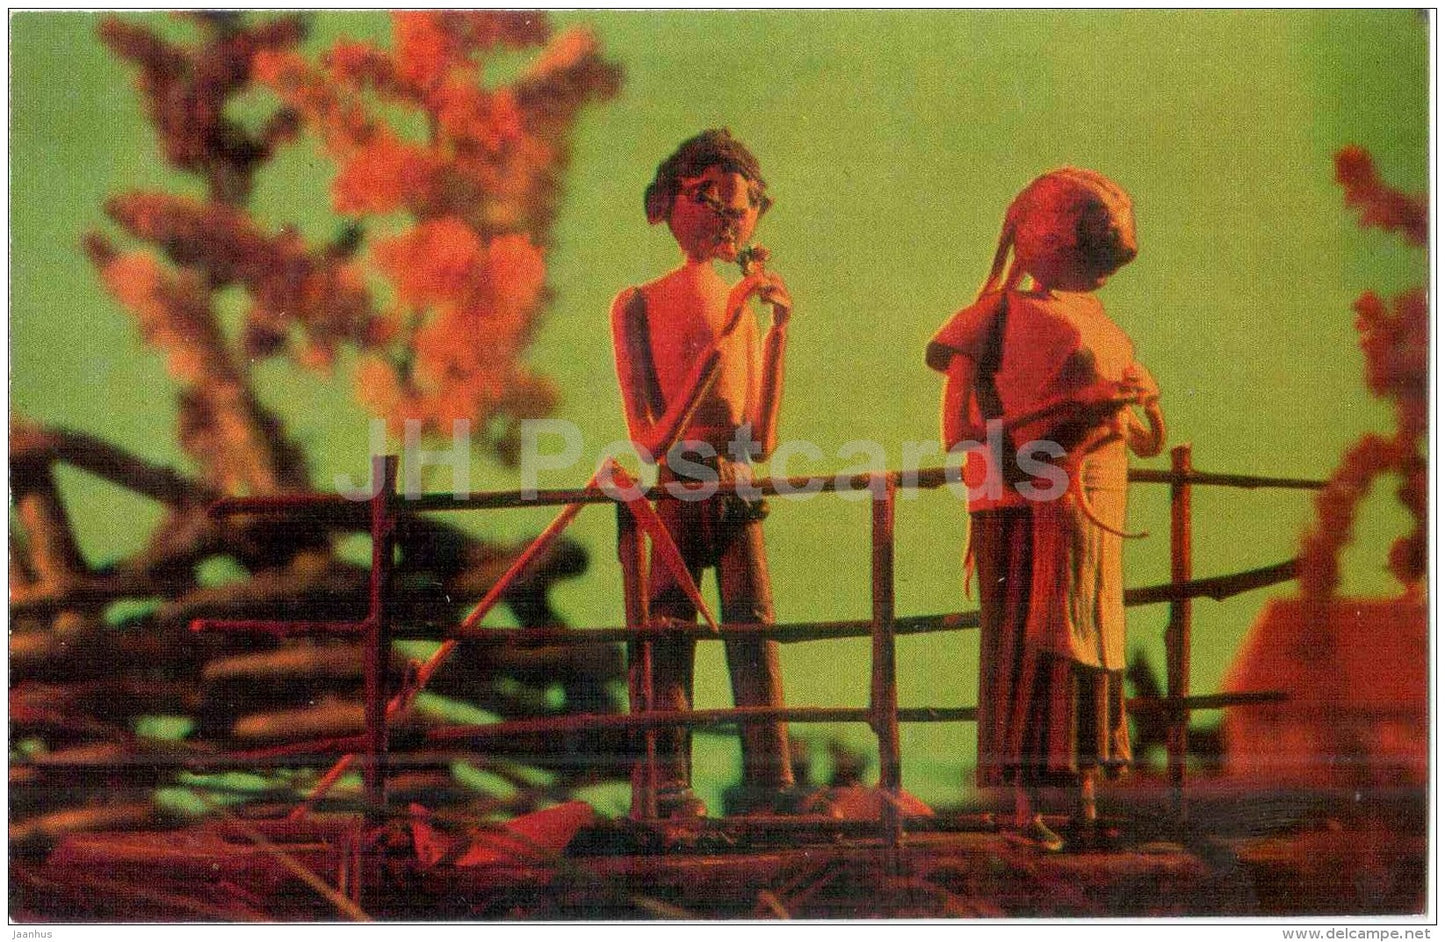 A Couple in Love - Magic of the Woods - wooden figures - 1971 - Russia USSR - unused - JH Postcards